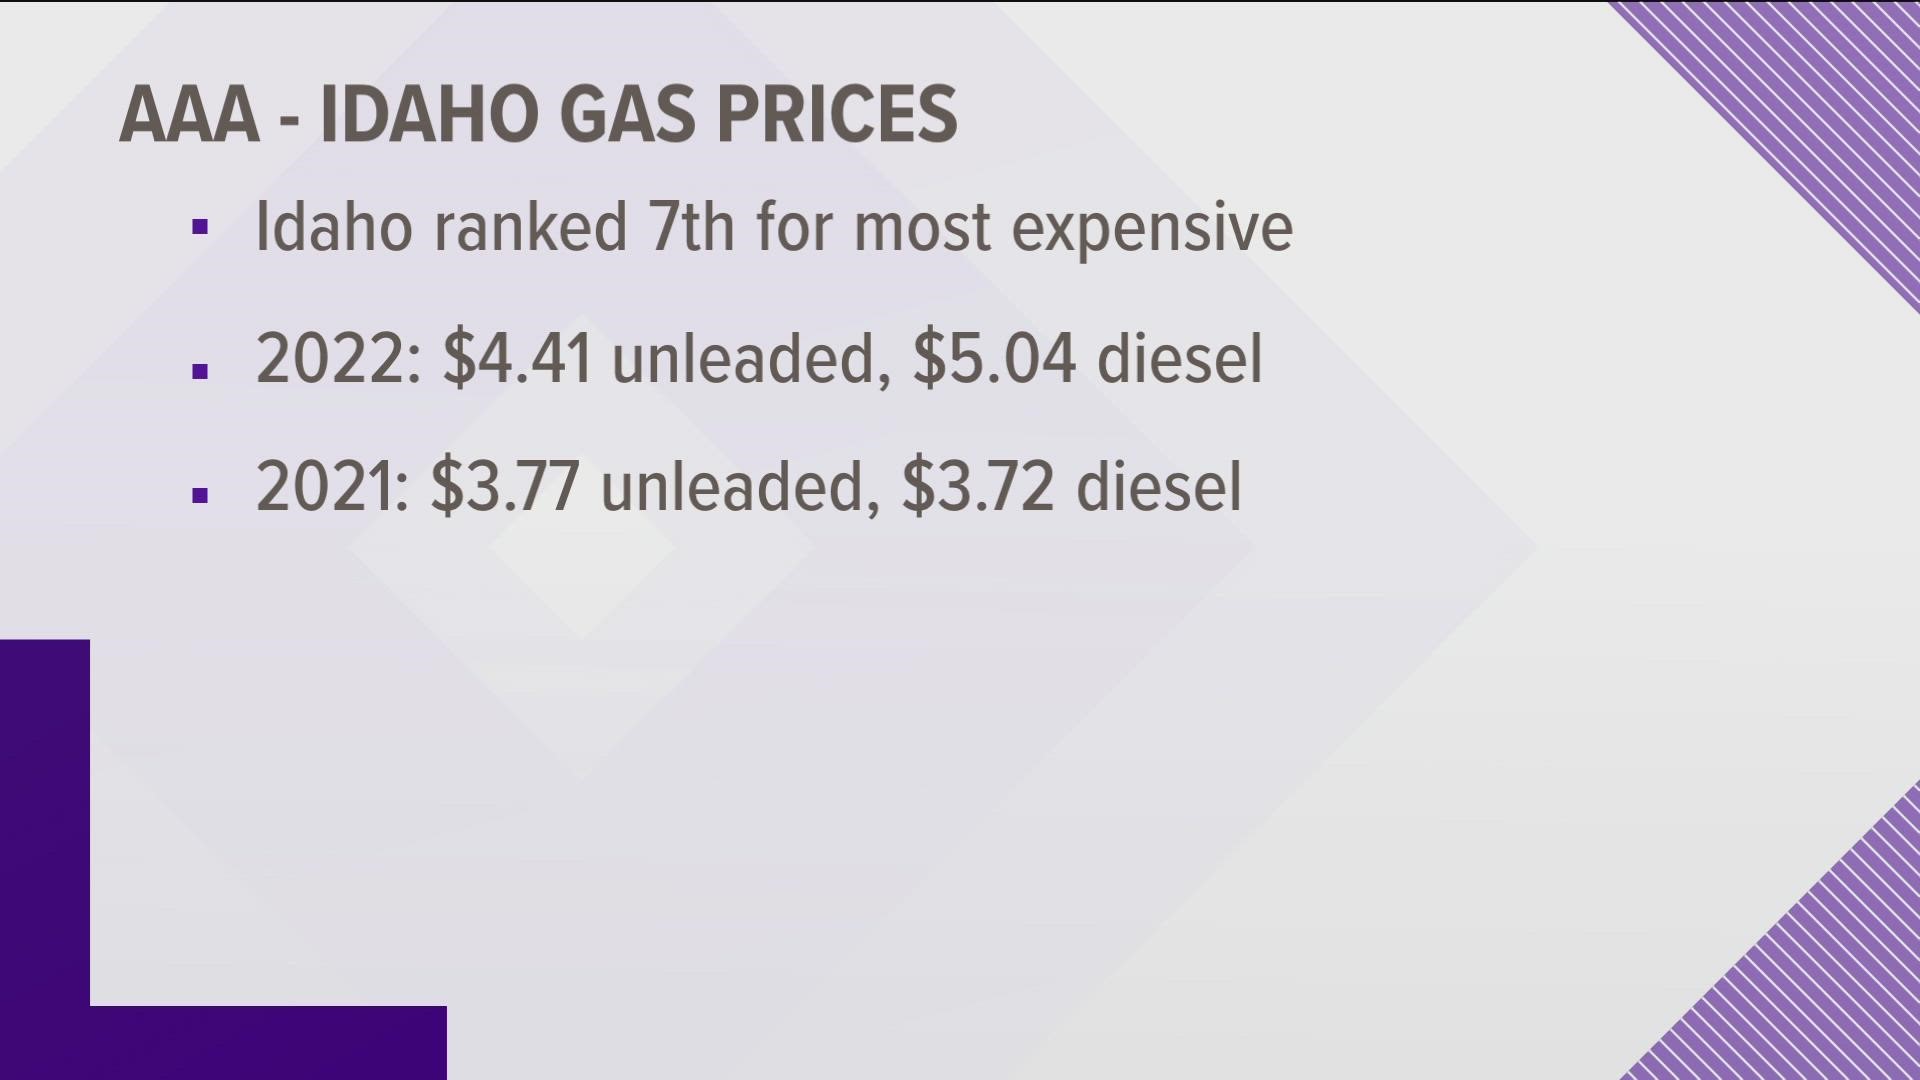 The average price for a gallon of regular unleaded in Idaho remains 64 cents higher than a year ago.